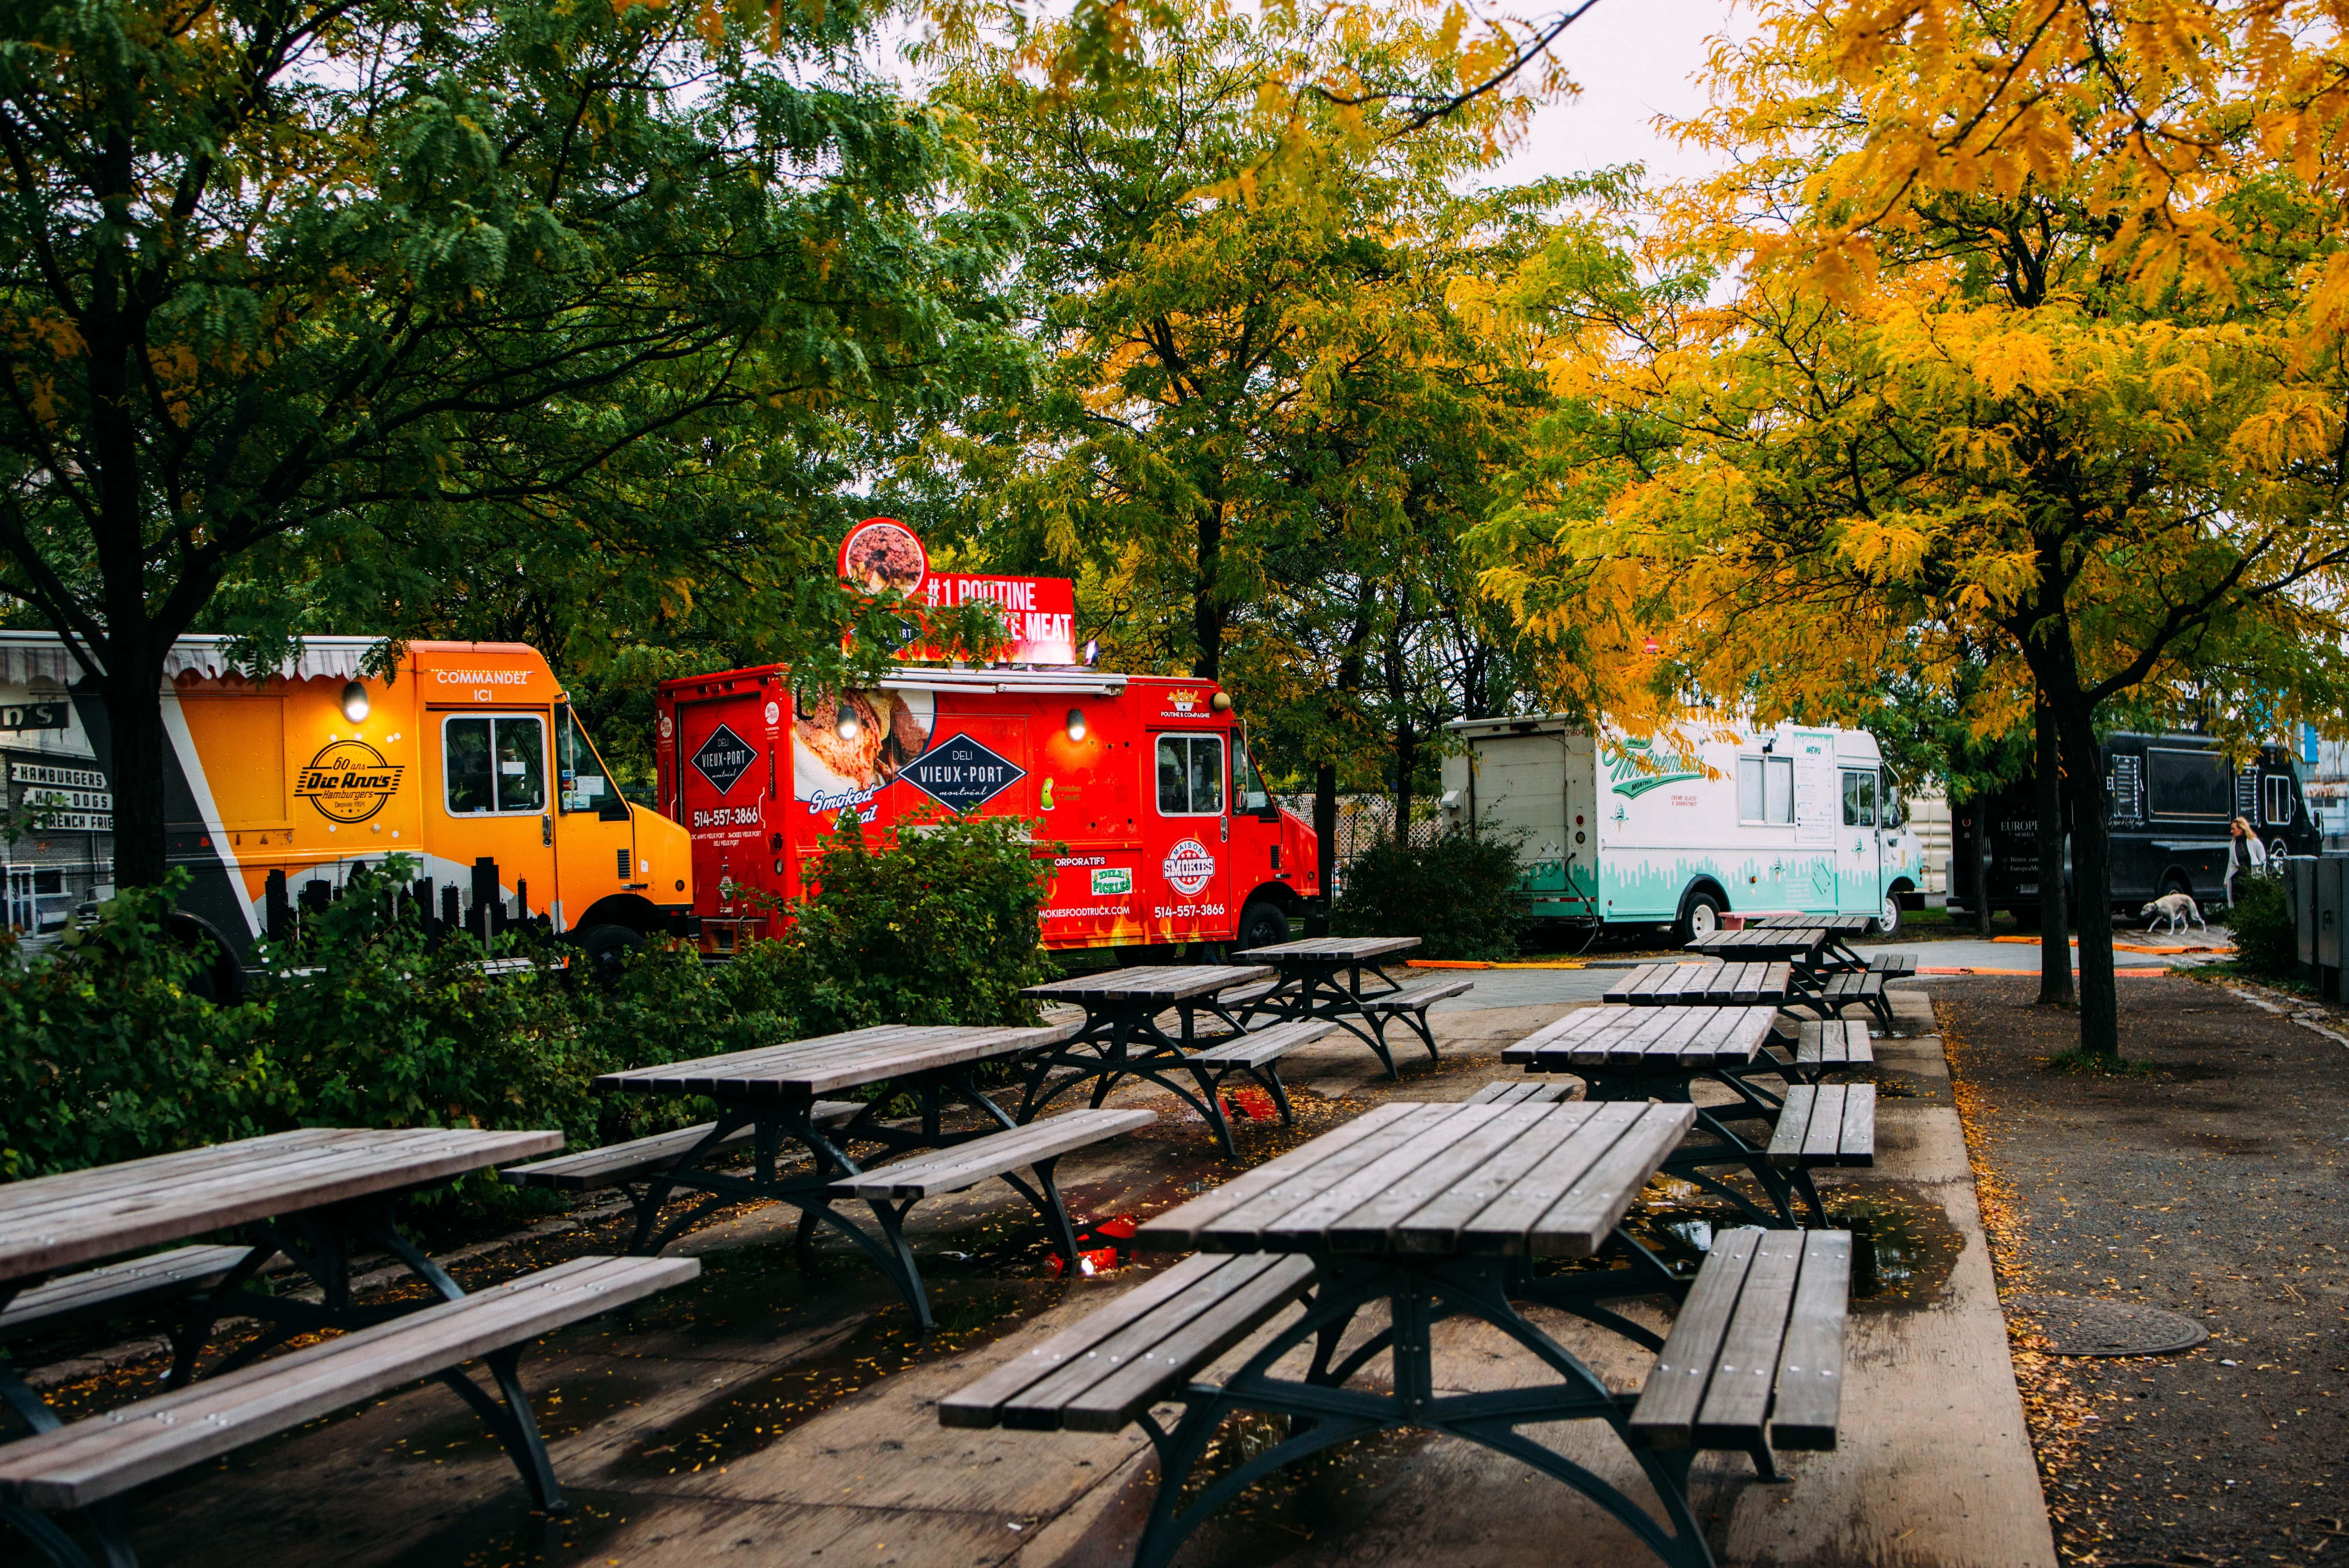 A park filled with picnic tables, leafy trees, and food trucks